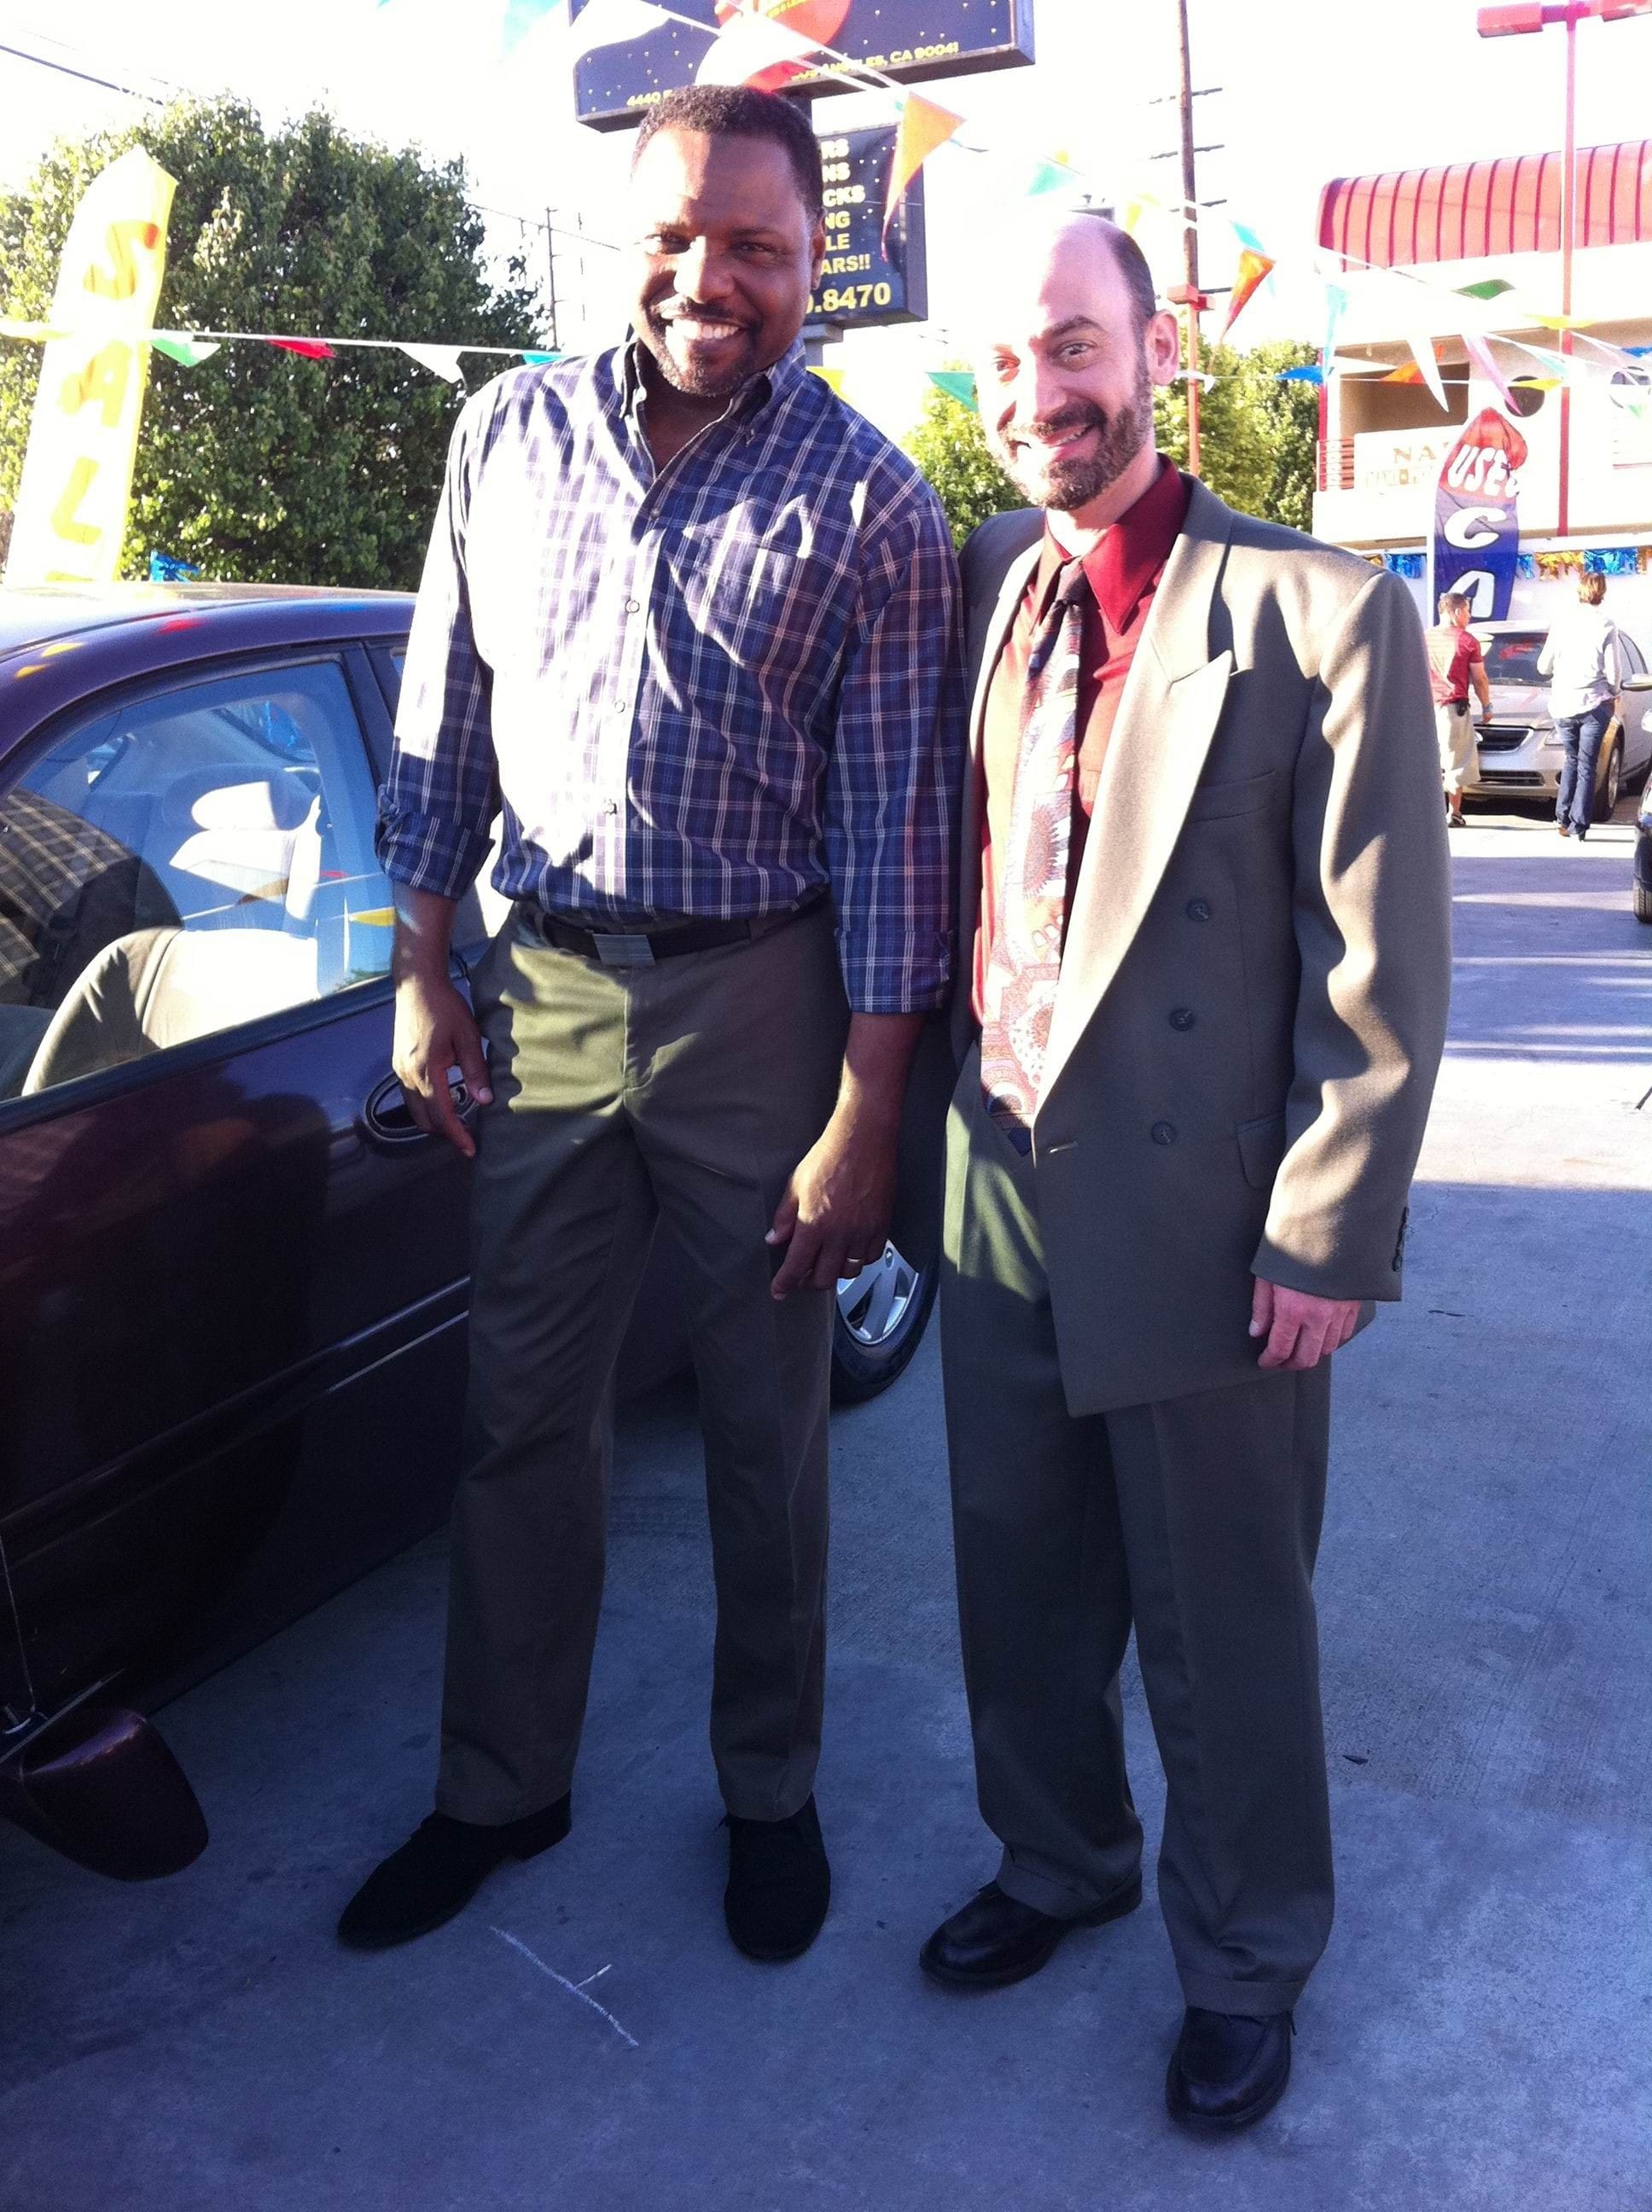 Actor Jeff Blumberg on set shooting a TV commercial, playing the role of a used car salesman